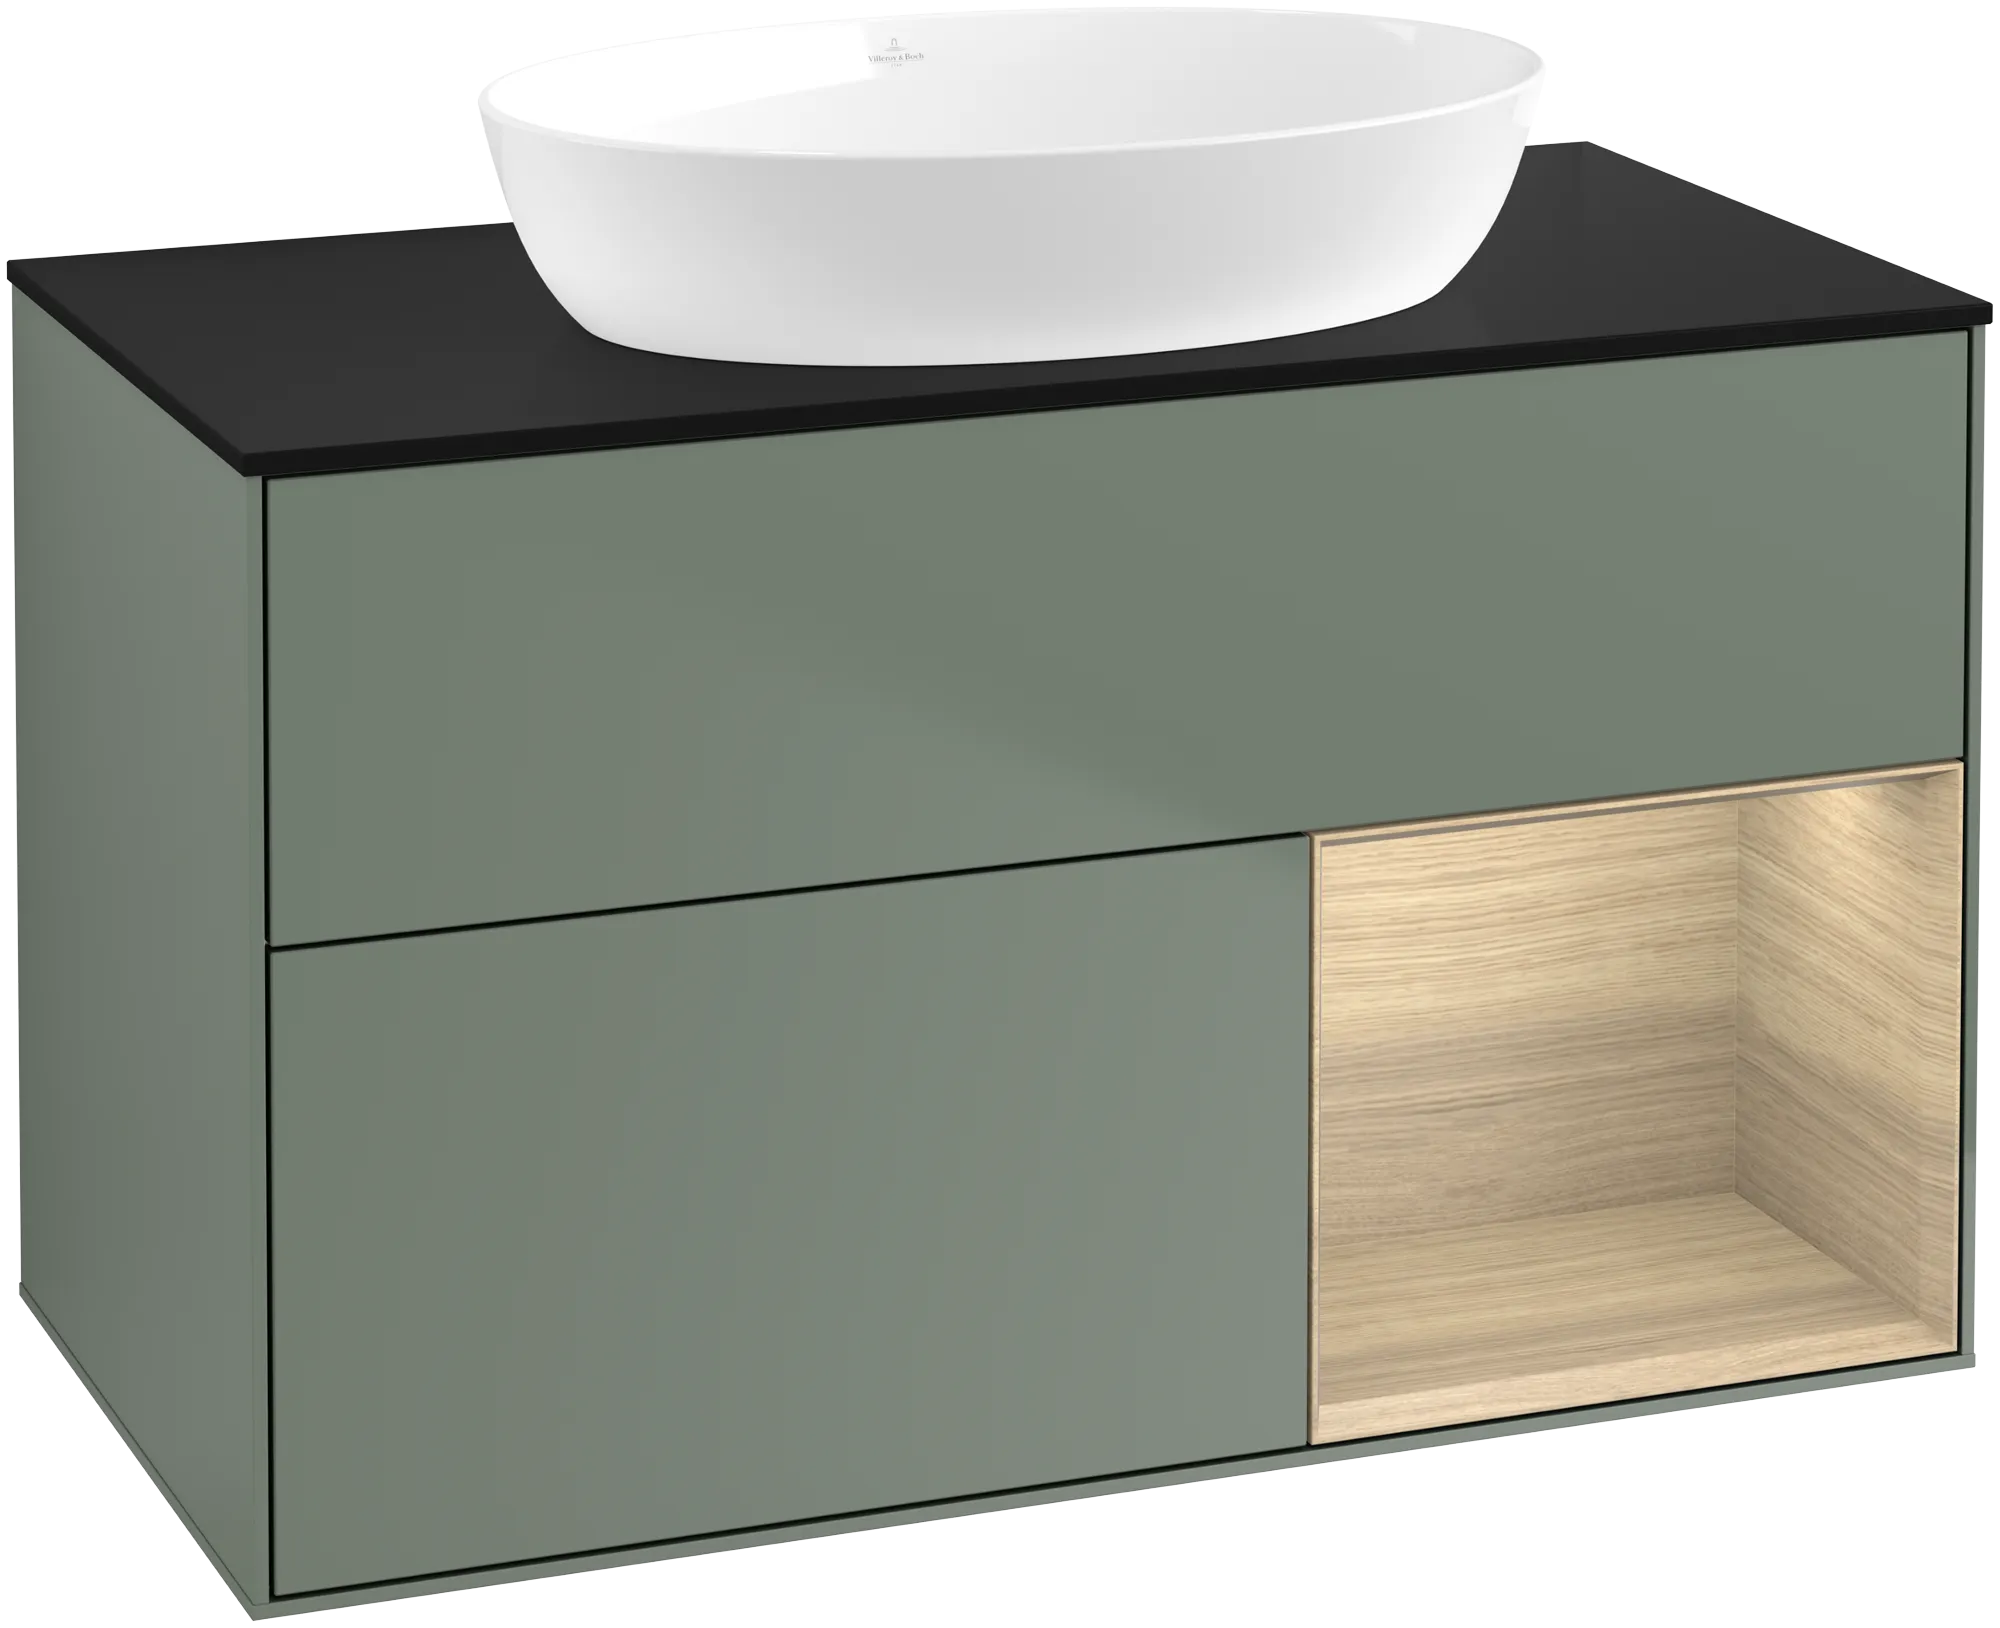 Picture of VILLEROY BOCH Finion Vanity unit, with lighting, 2 pull-out compartments, 1000 x 603 x 501 mm, Olive Matt Lacquer / Oak Veneer / Glass Black Matt #GA22PCGM